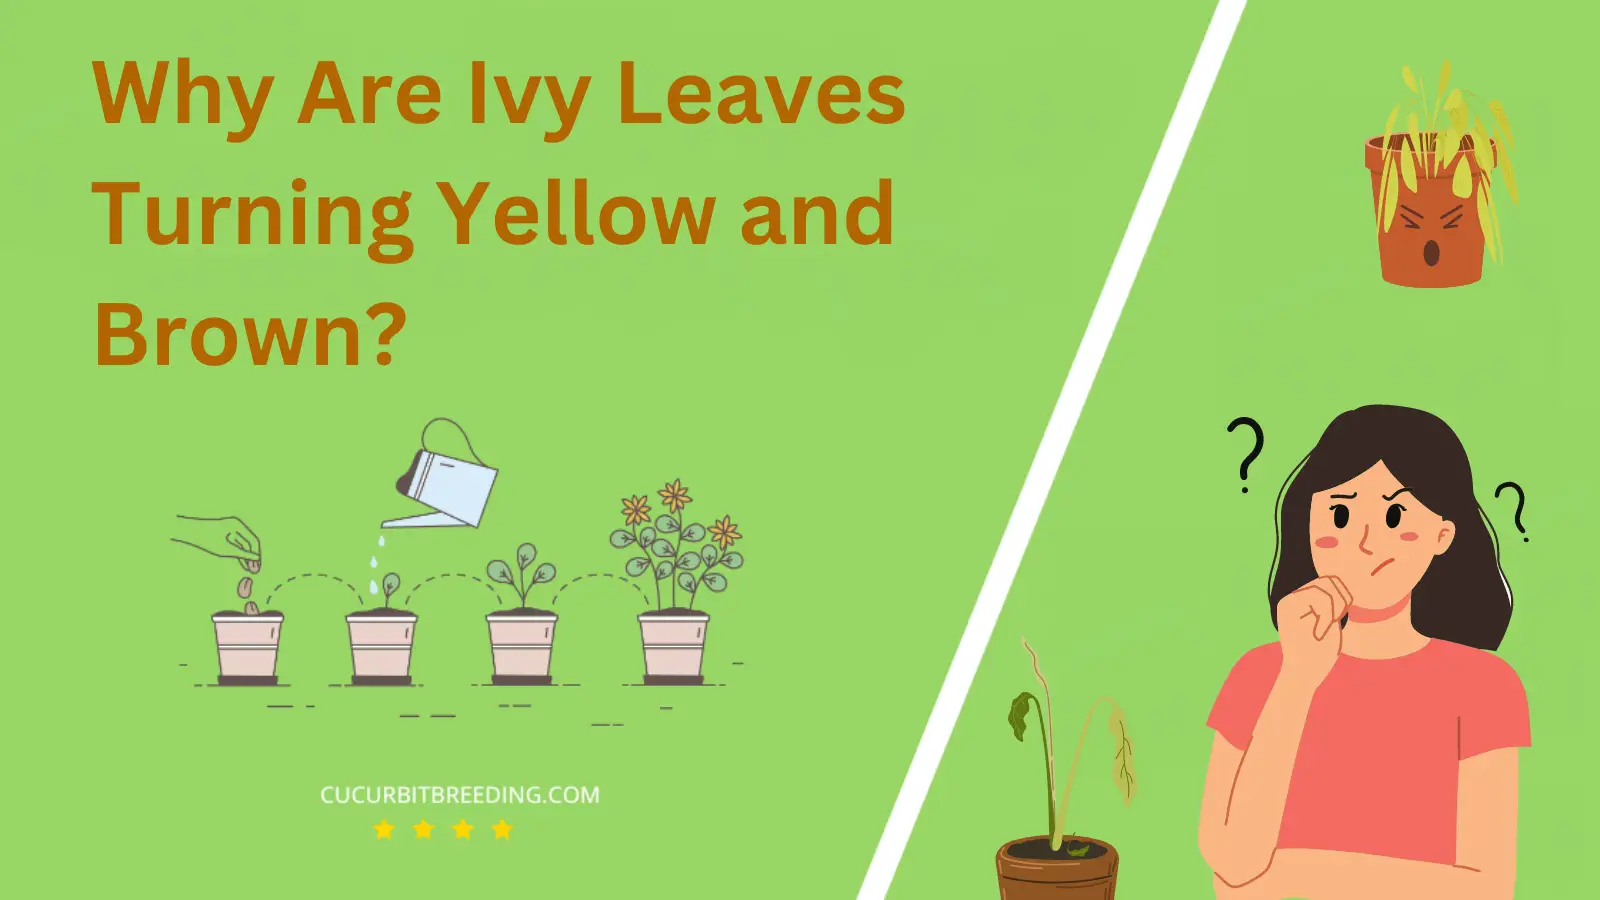 Why Are Ivy Leaves Turning Yellow and Brown